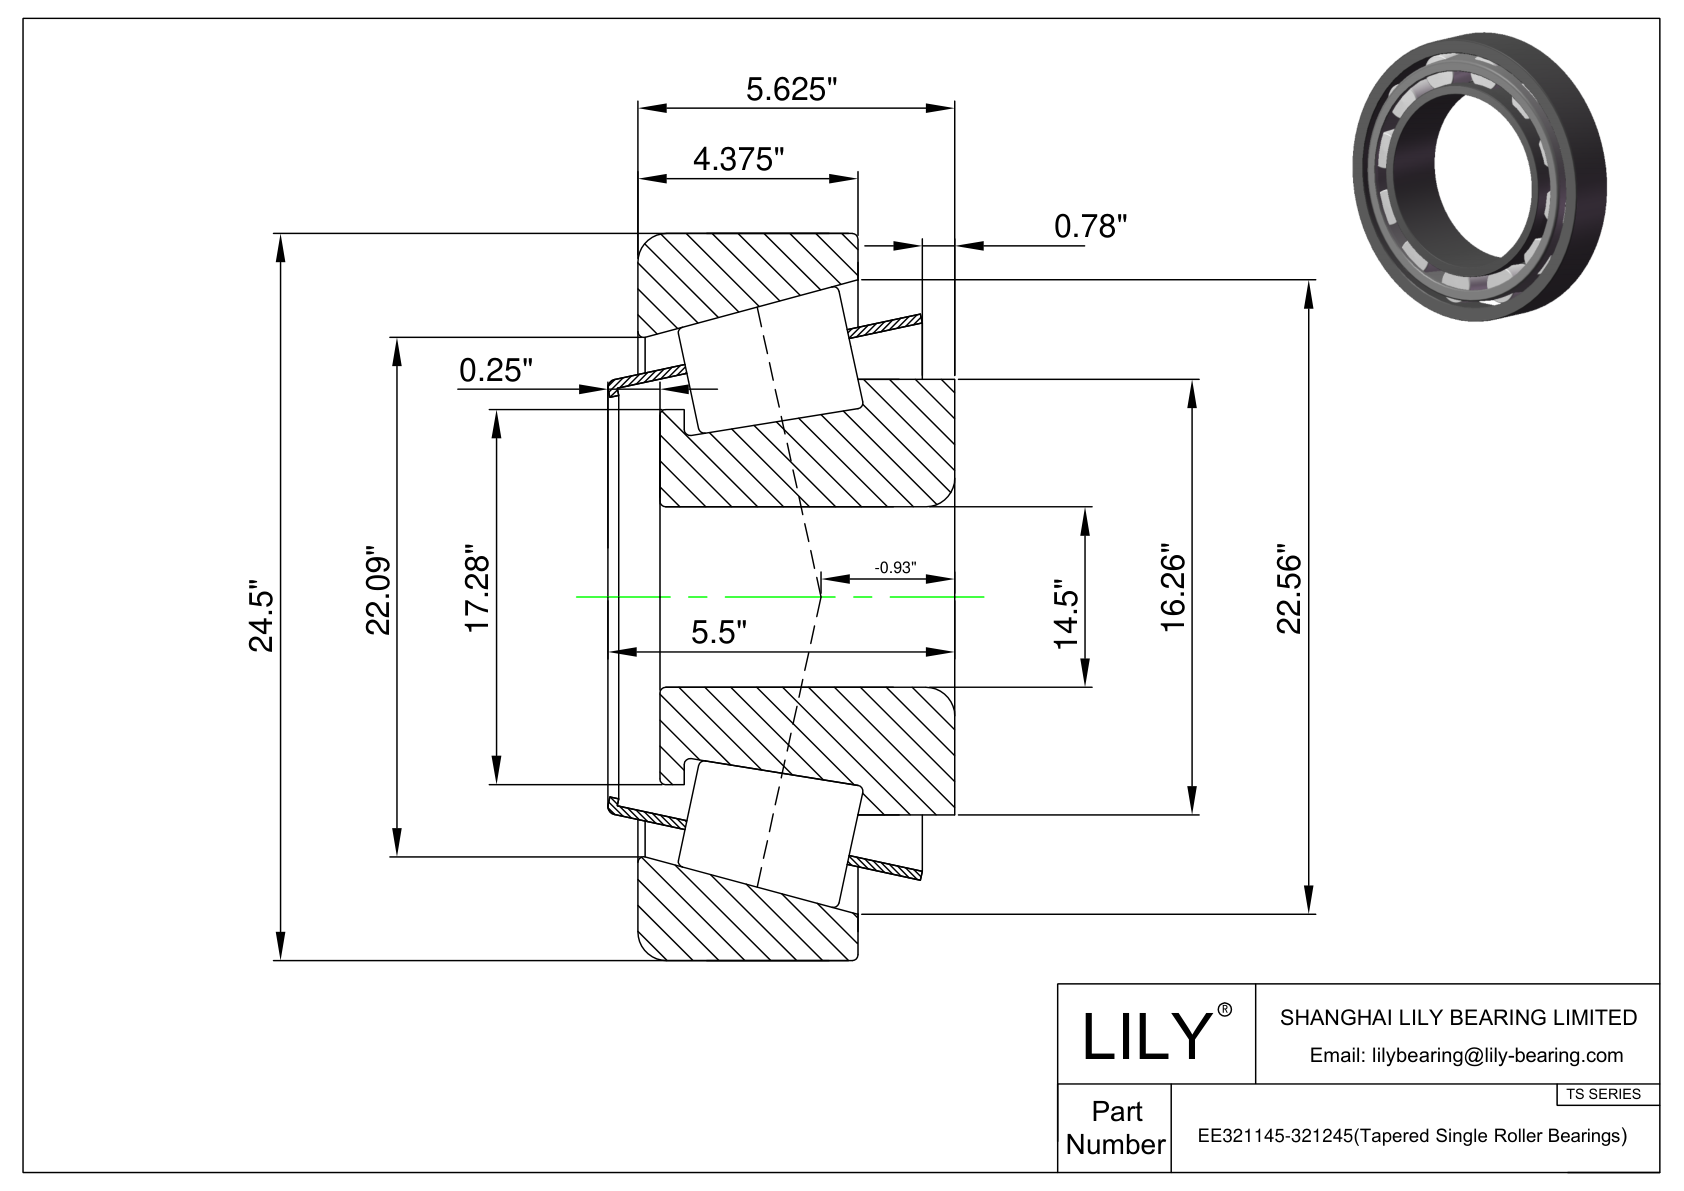 EE321145-321245 TS (Tapered Single Roller Bearings) (Imperial) cad drawing